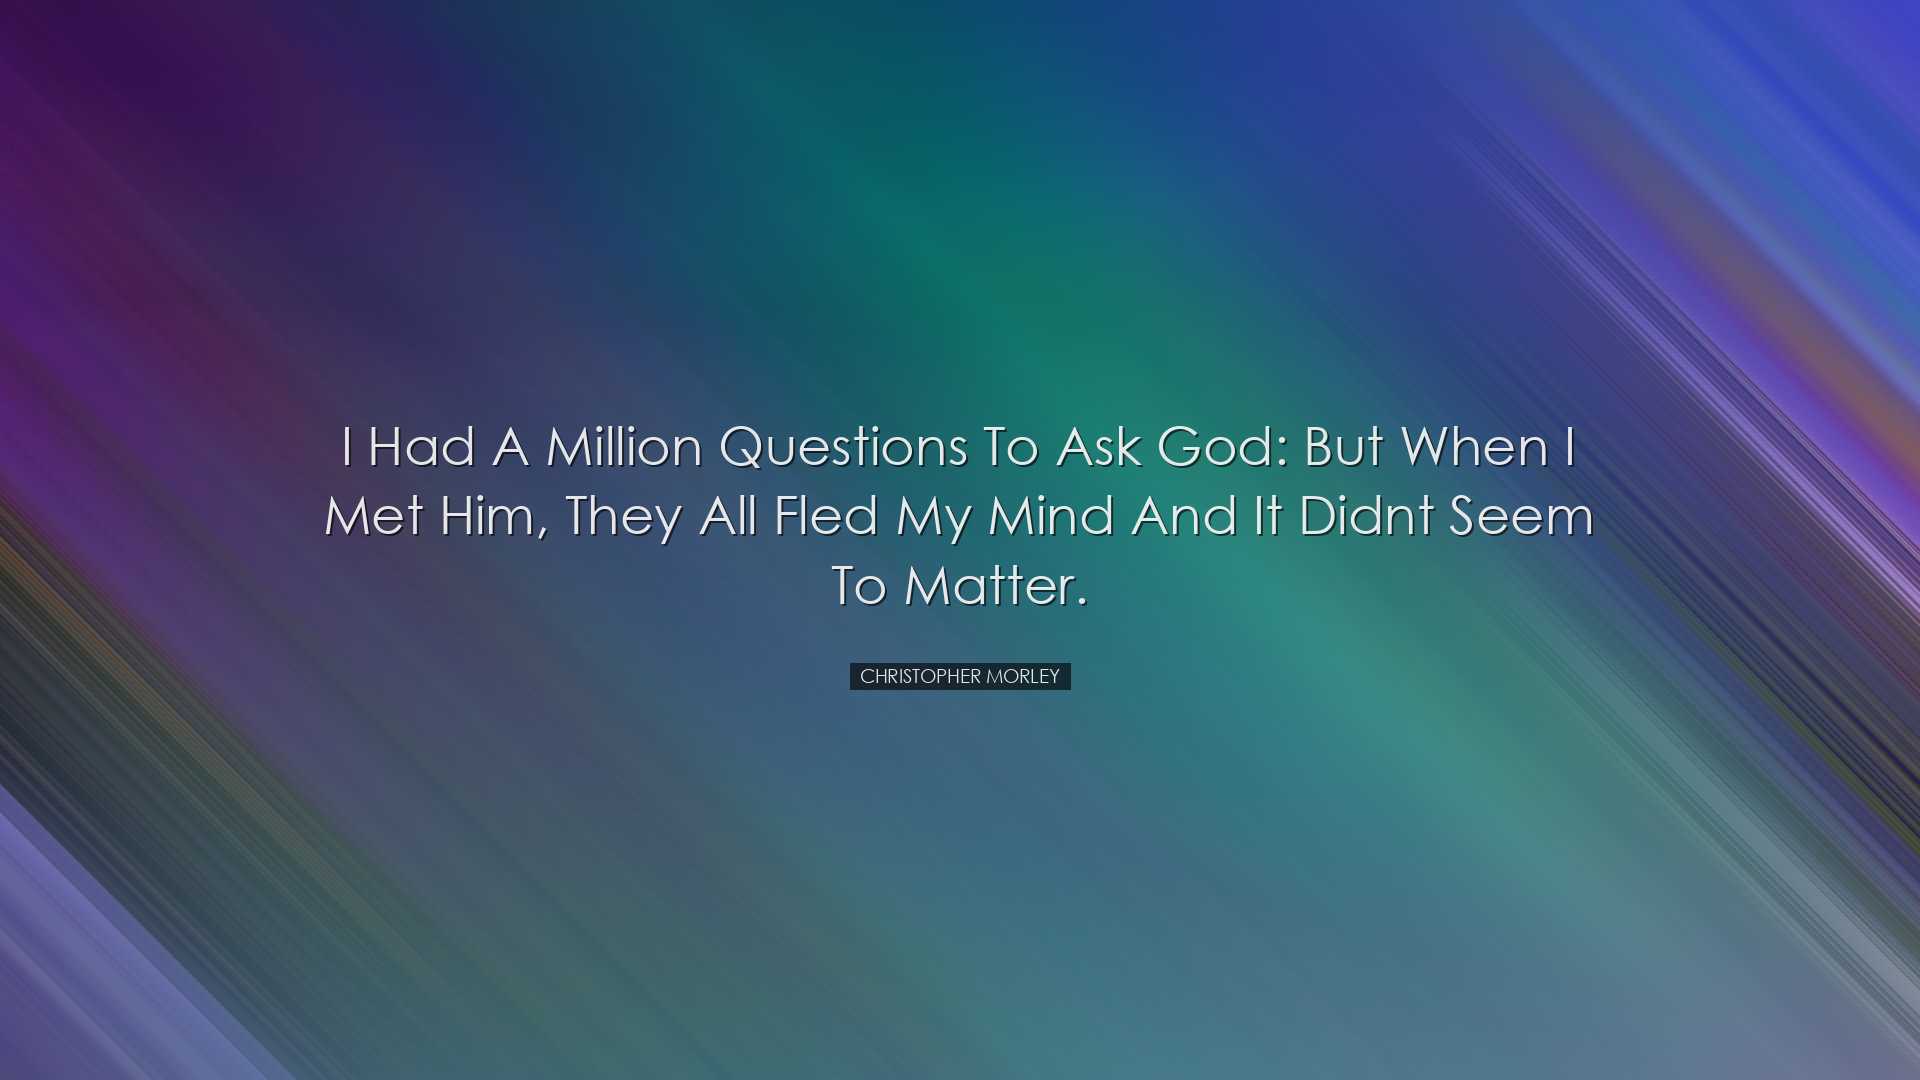 I had a million questions to ask God: but when I met Him, they all